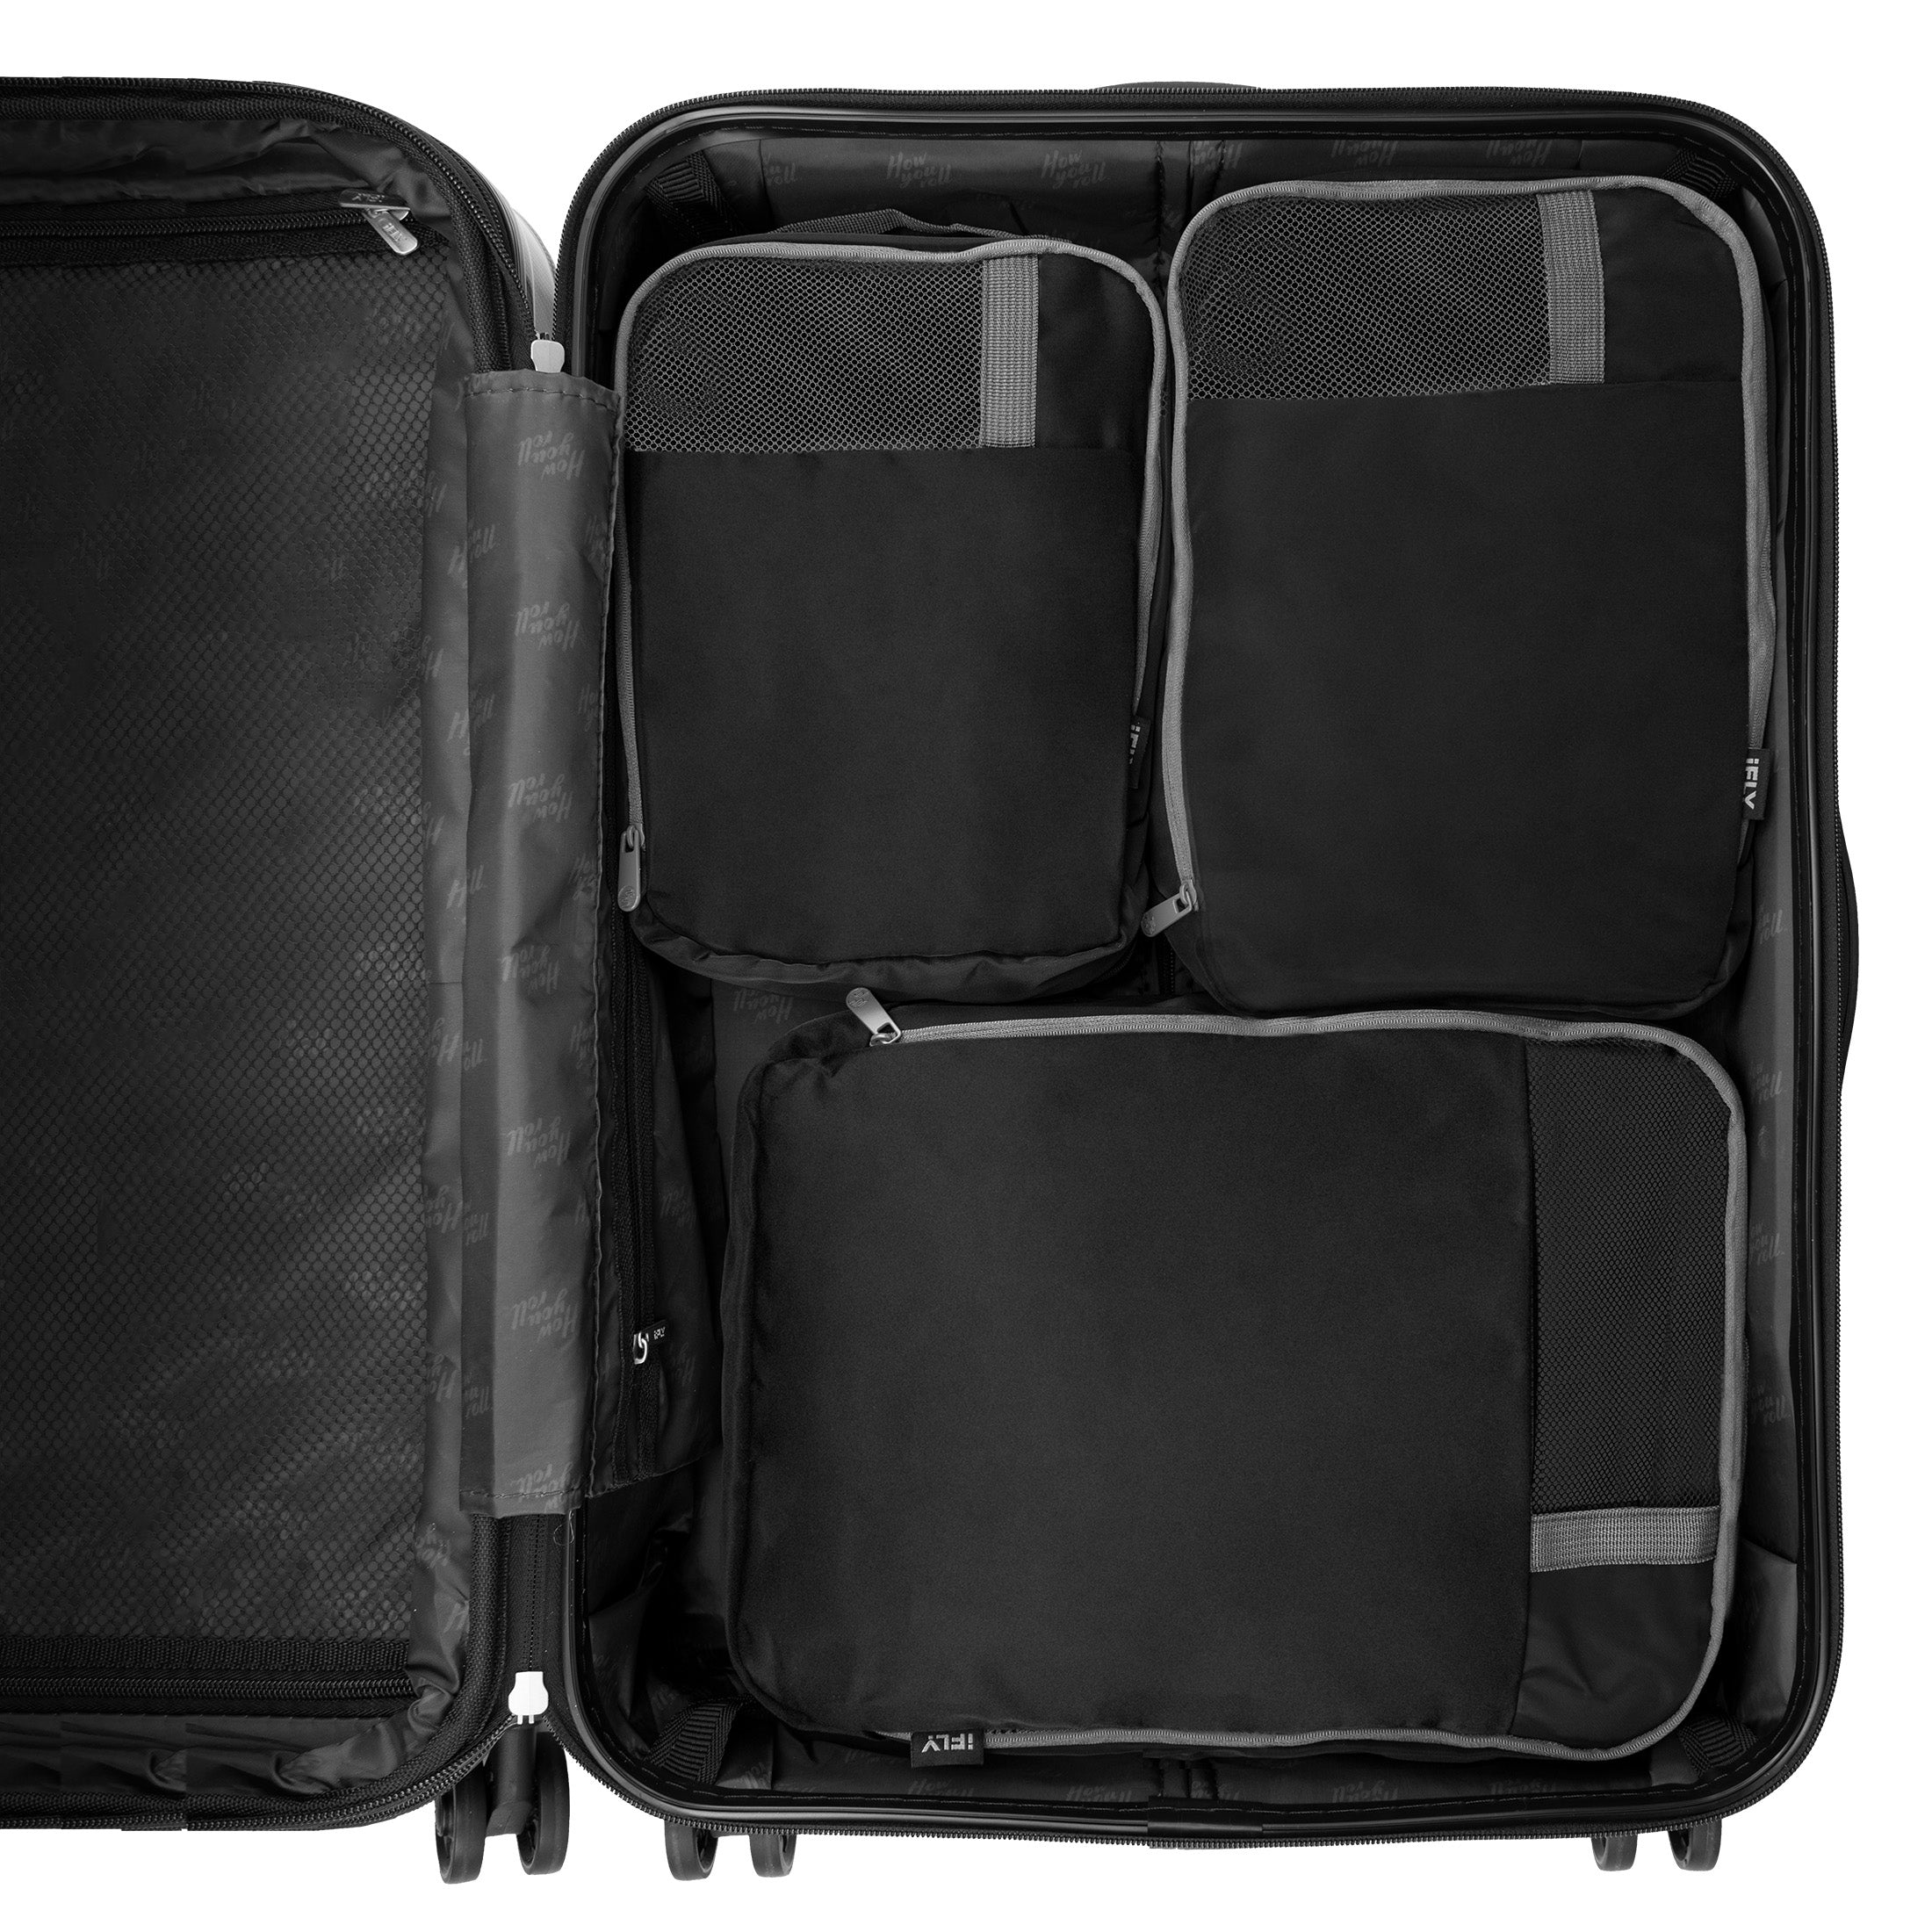 3-Piece Packing Cube Set | iFLY Luggage Co.